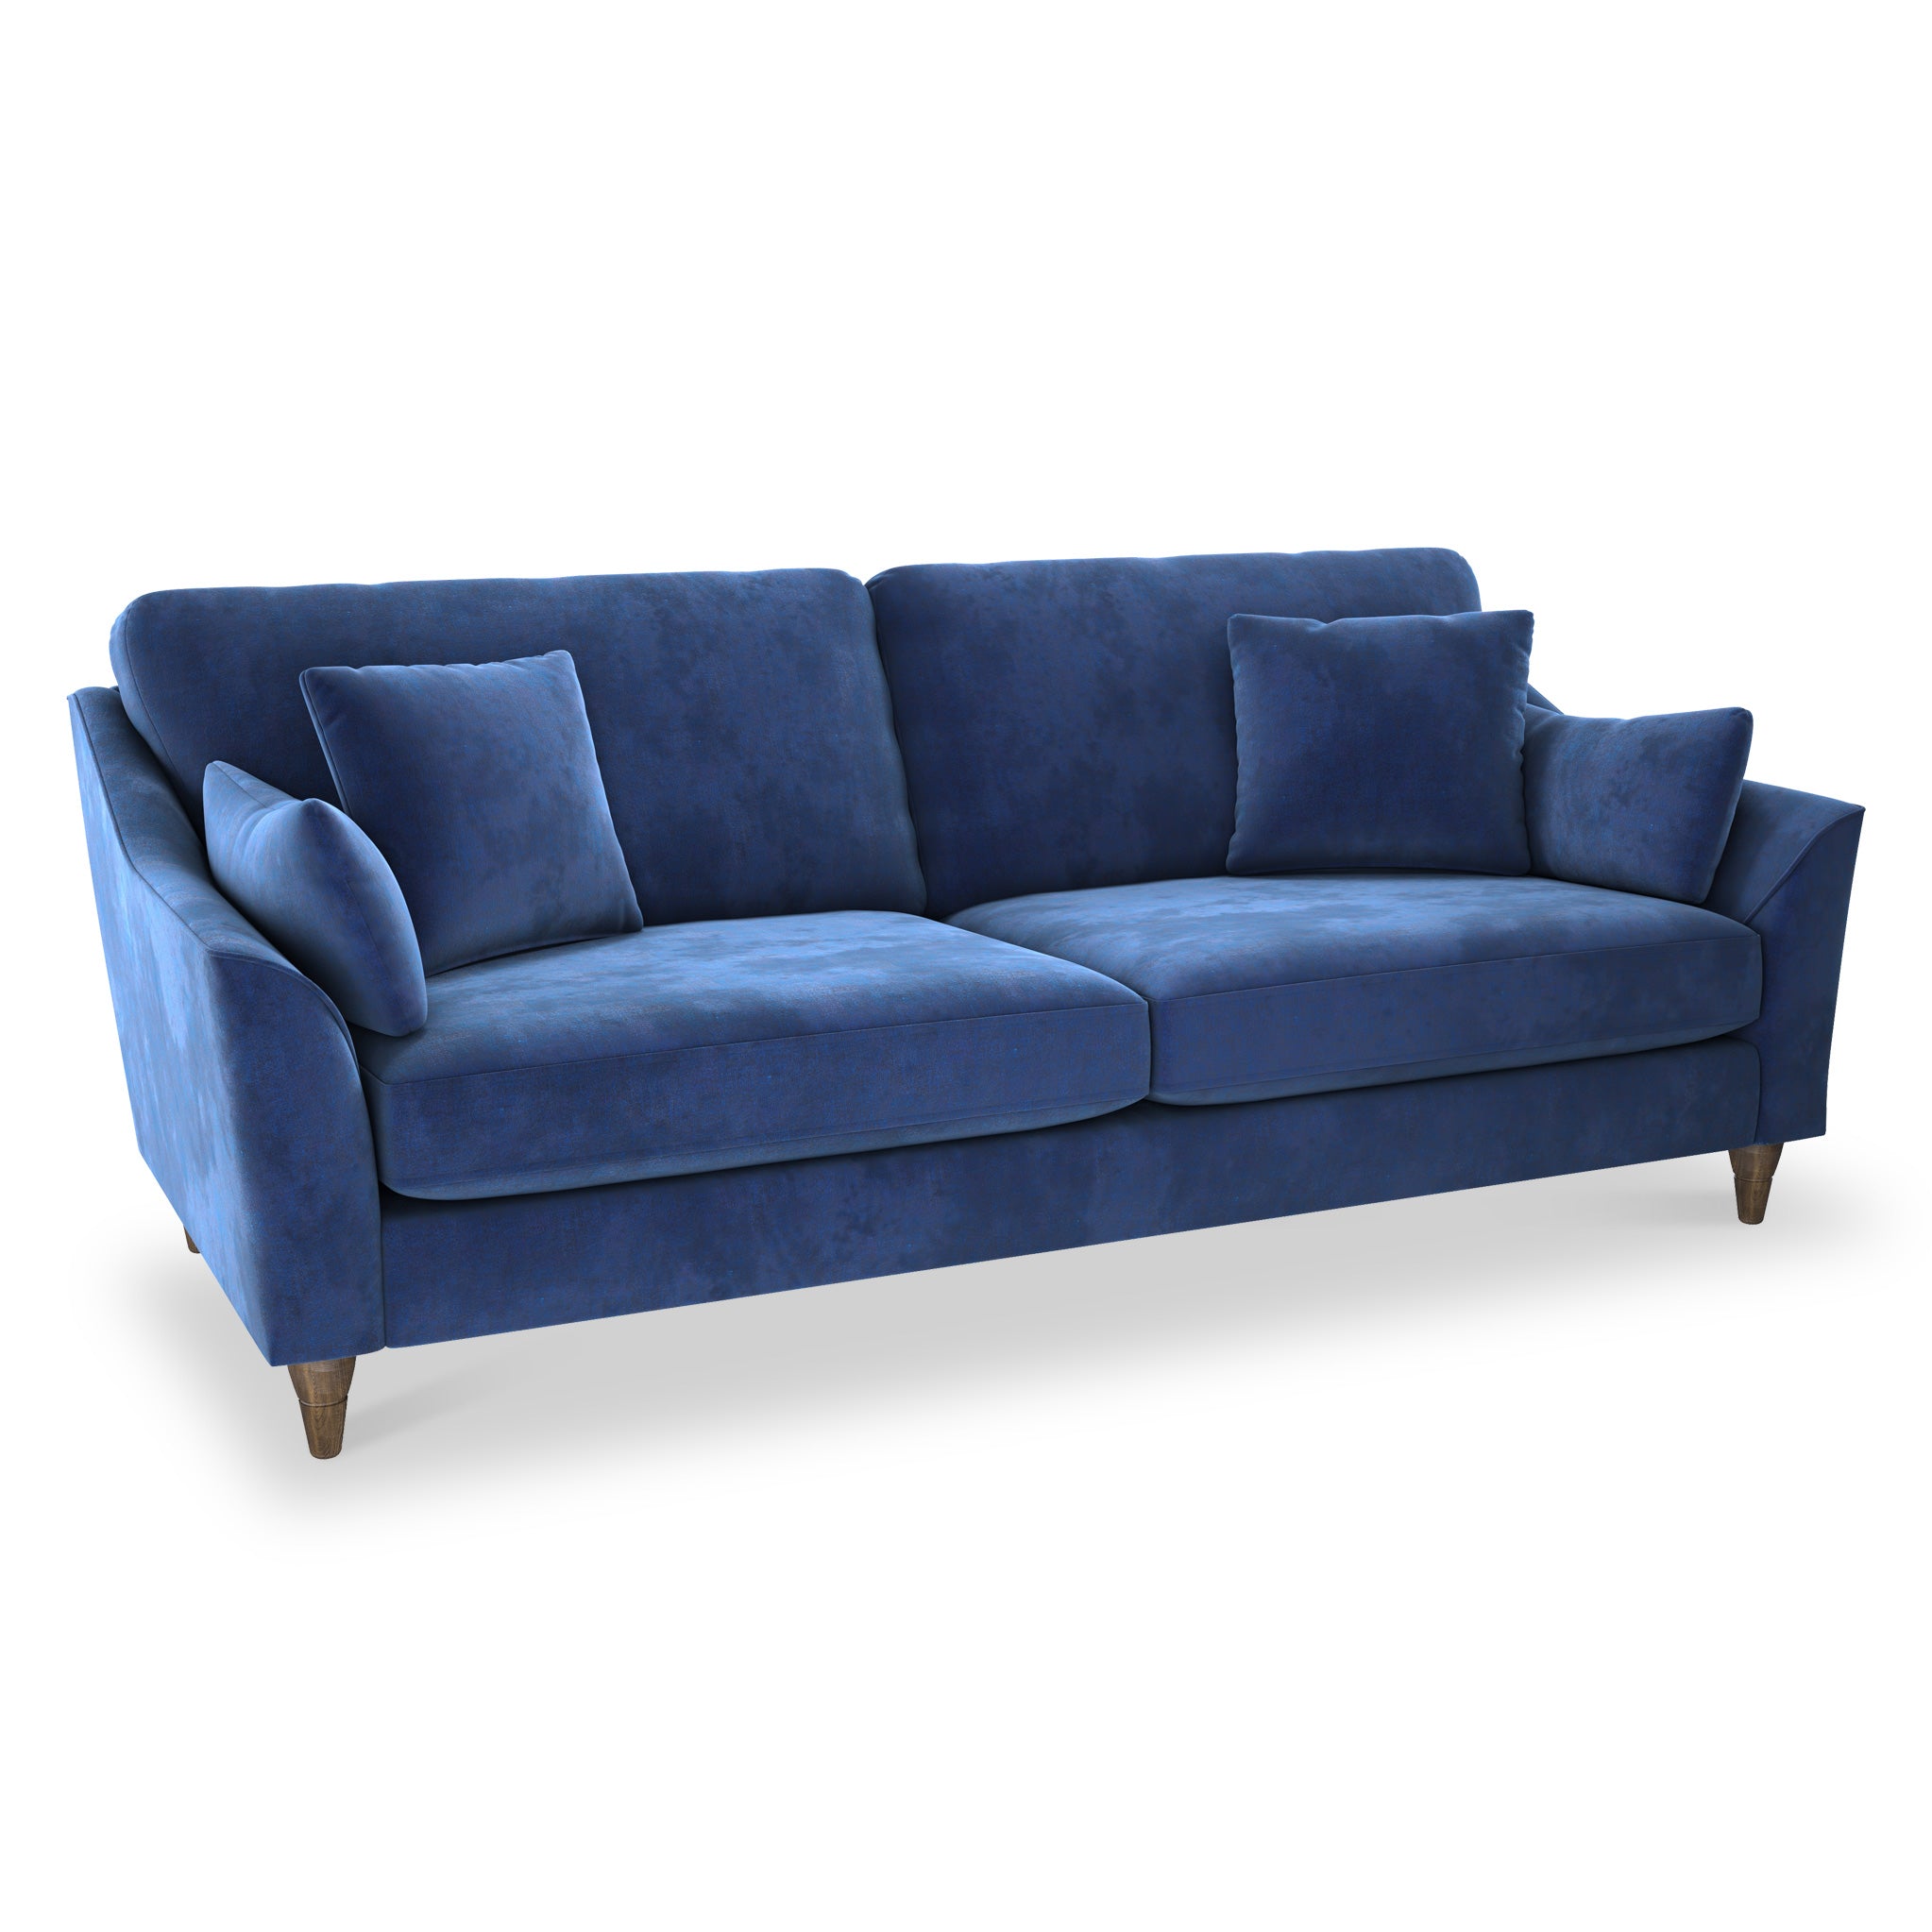 Charice 3 Seater Fabric Sofa Chic Modern Couch Roseland